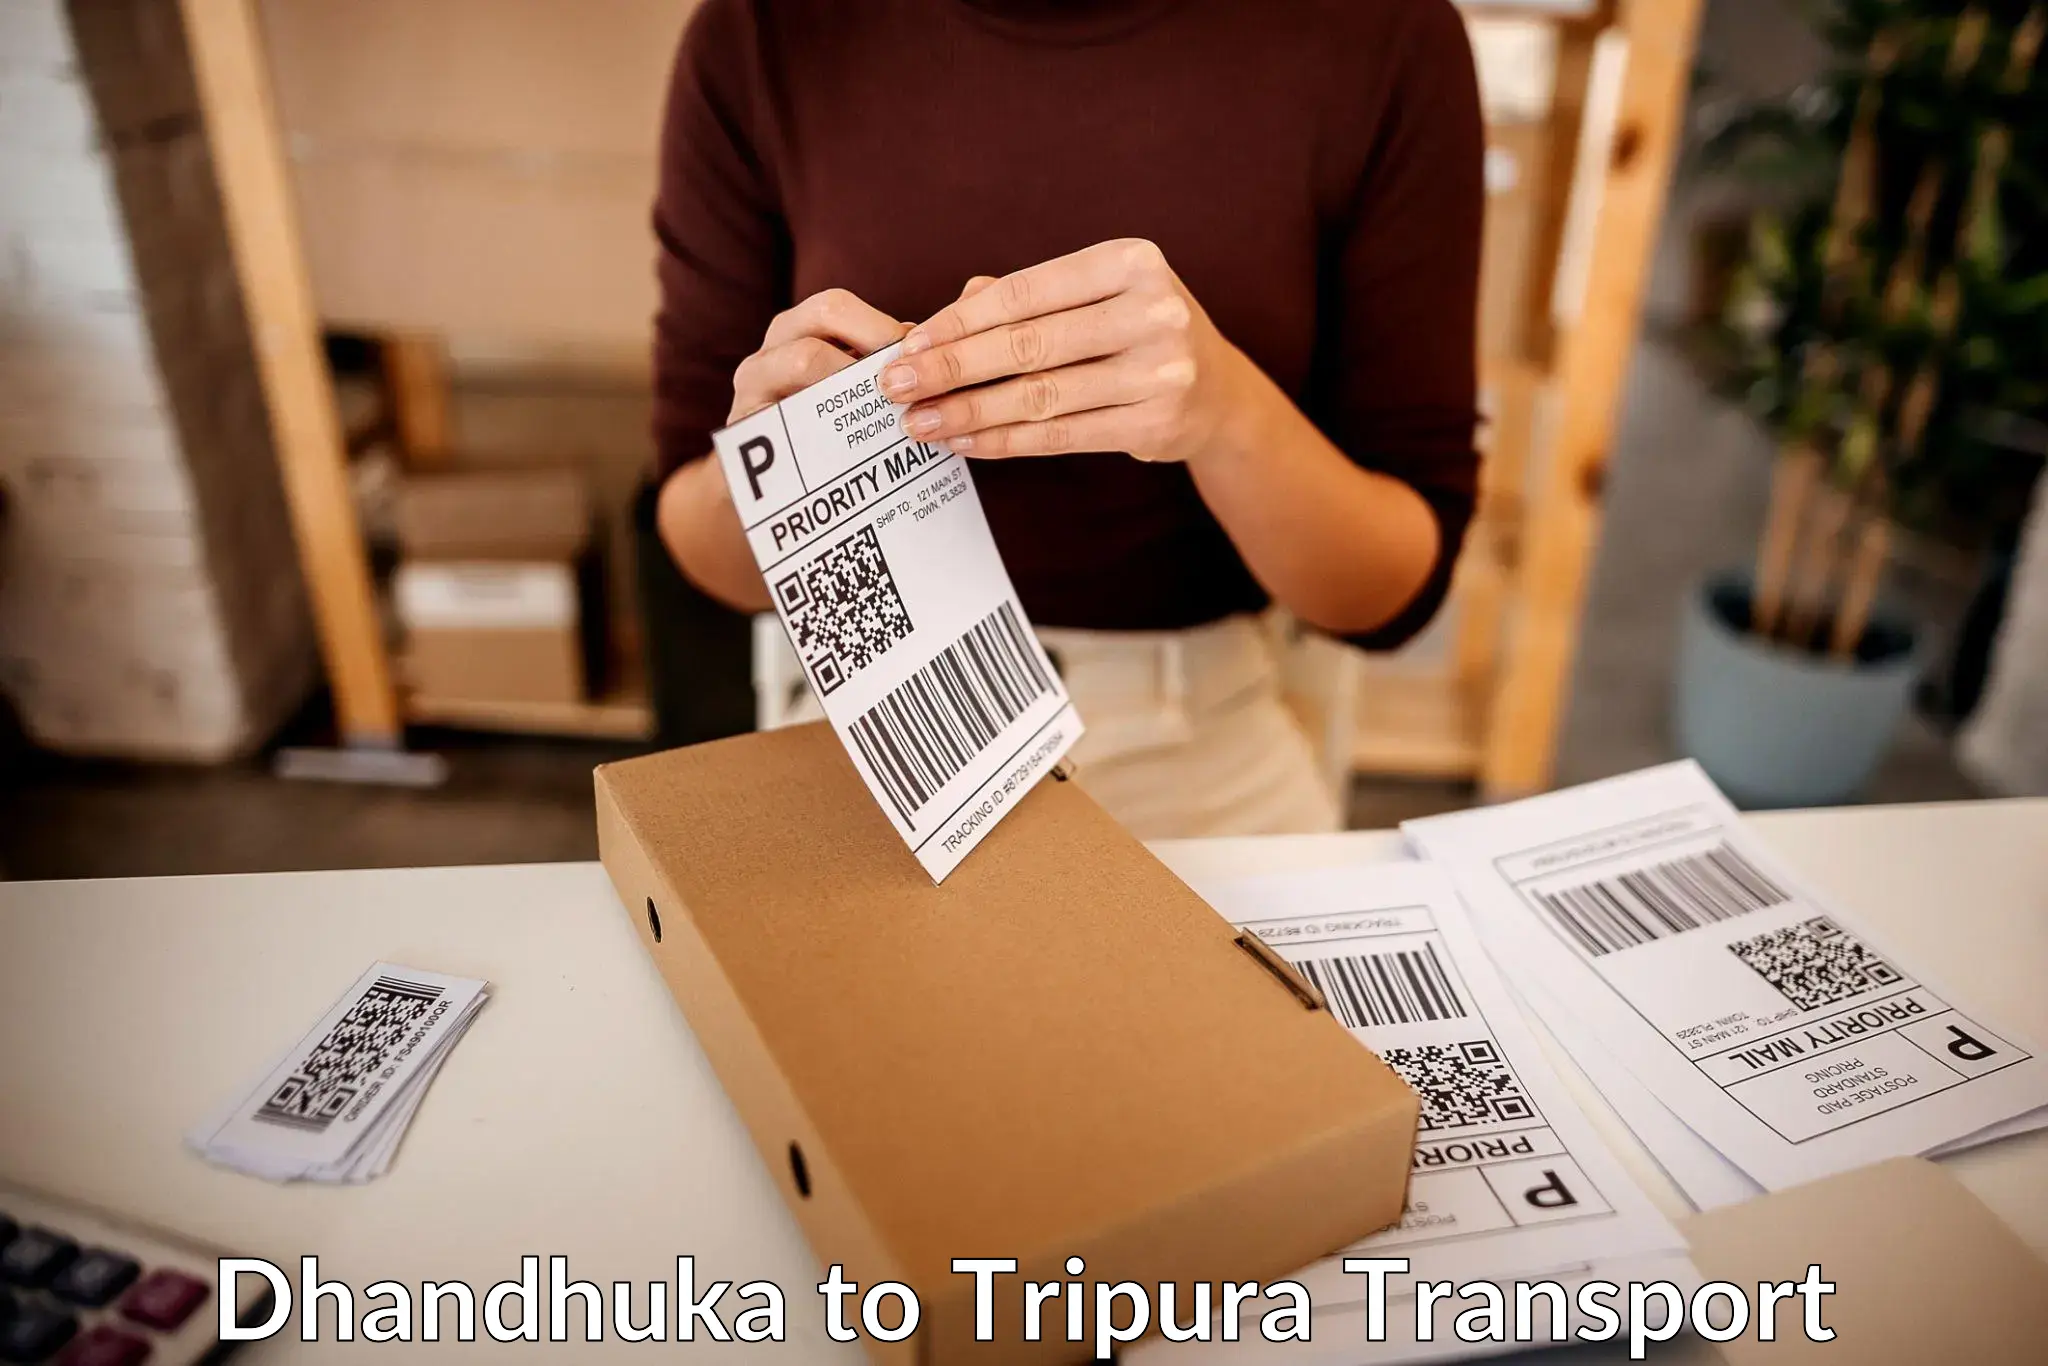 Material transport services Dhandhuka to Udaipur Tripura